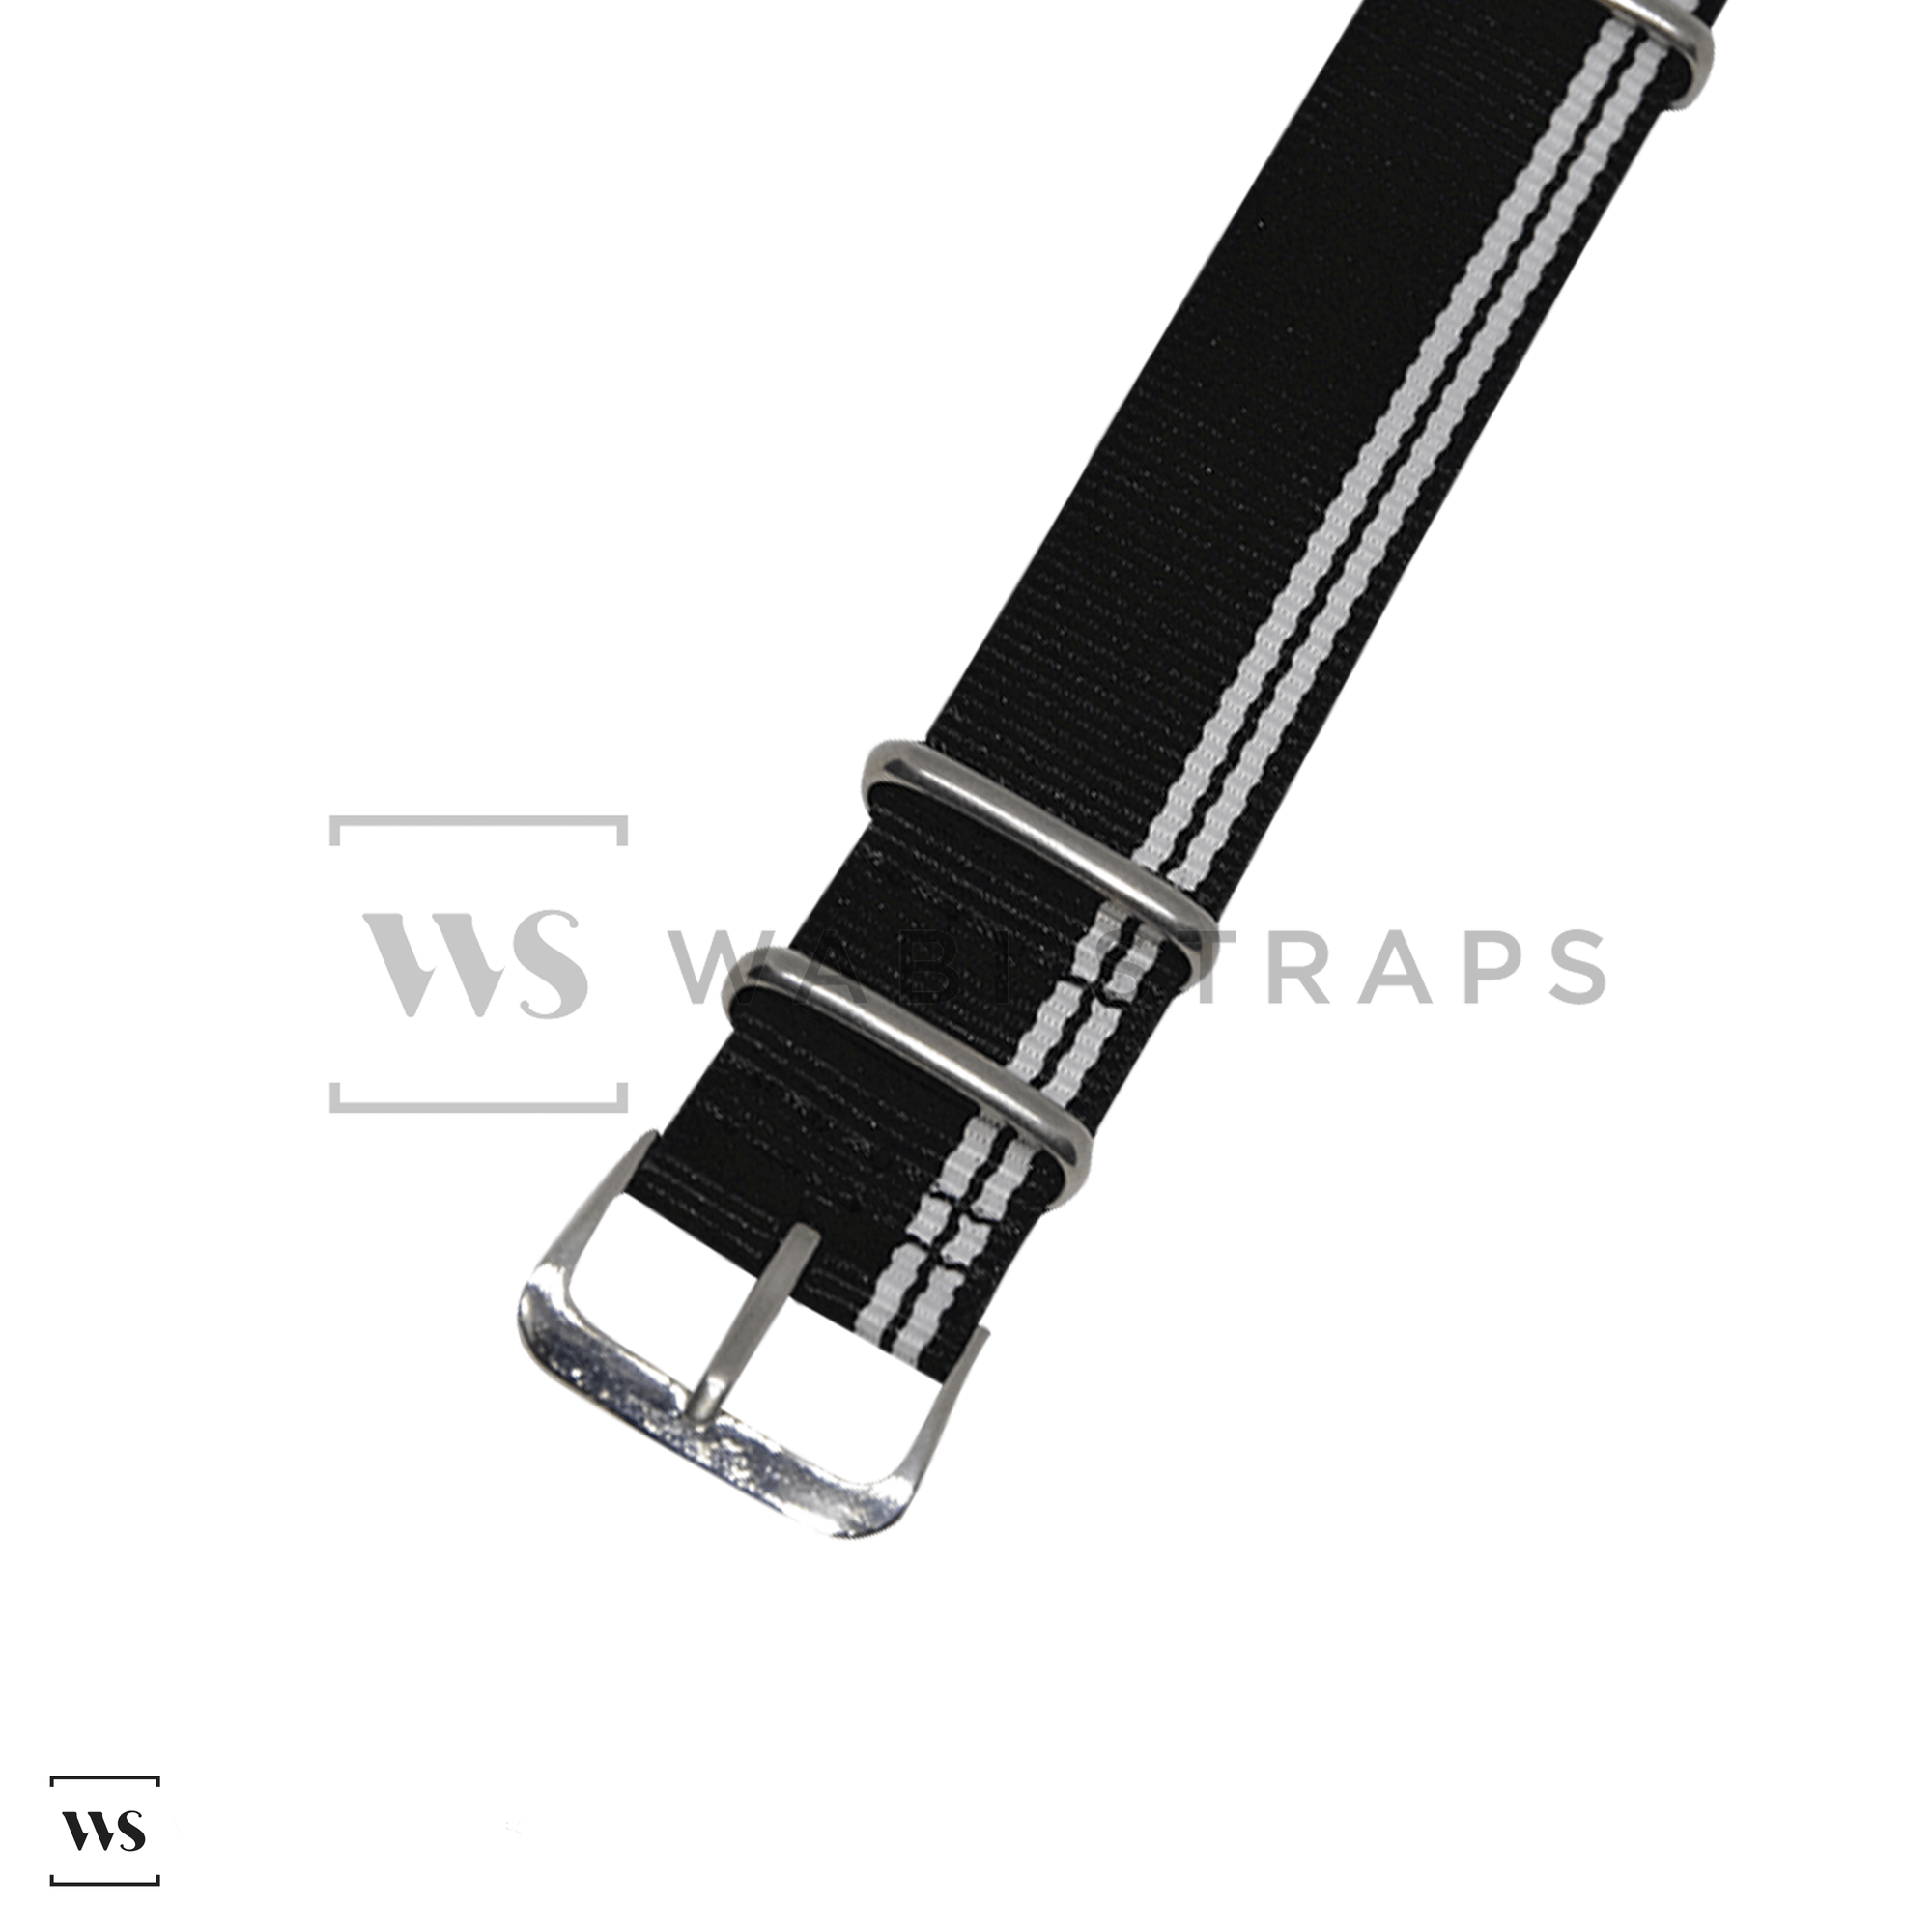 White Stripes on Black Ducati Special British Military Watch Strap